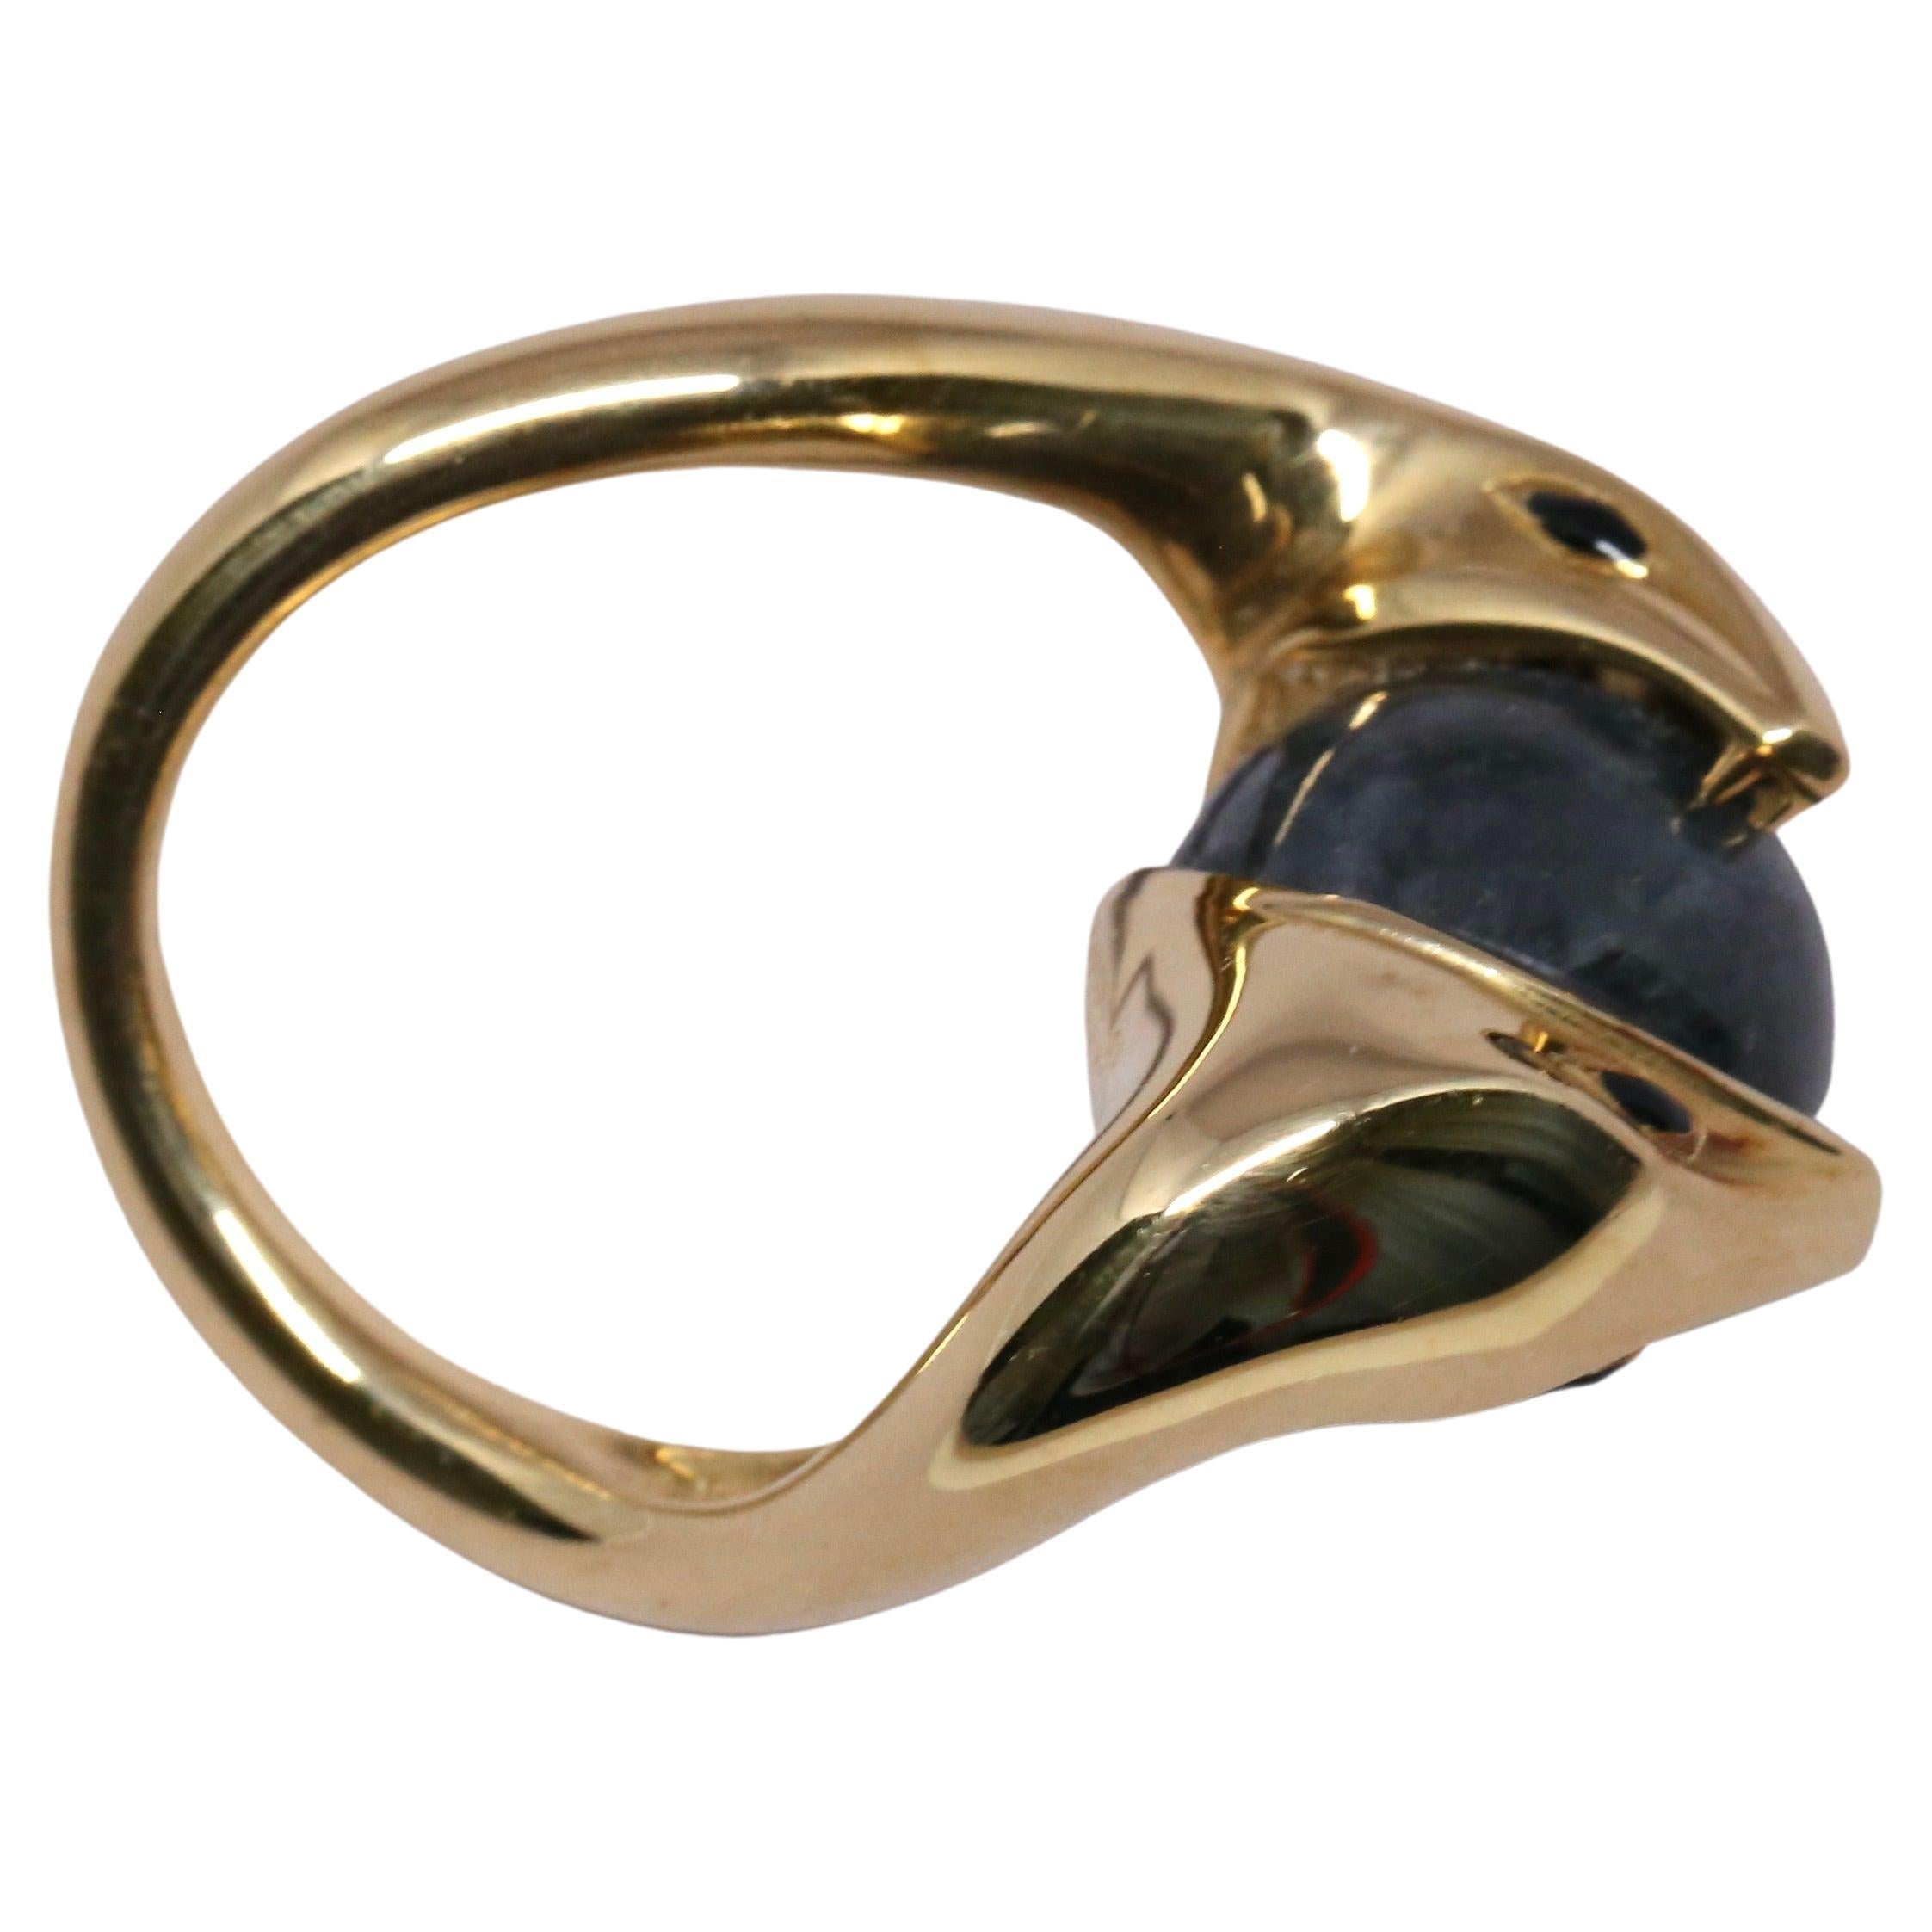 Boucheron 'Trouble Jade' 18 Karat Snake Ring with Onyx Cabochon Eyes In Good Condition For Sale In Oakland, CA